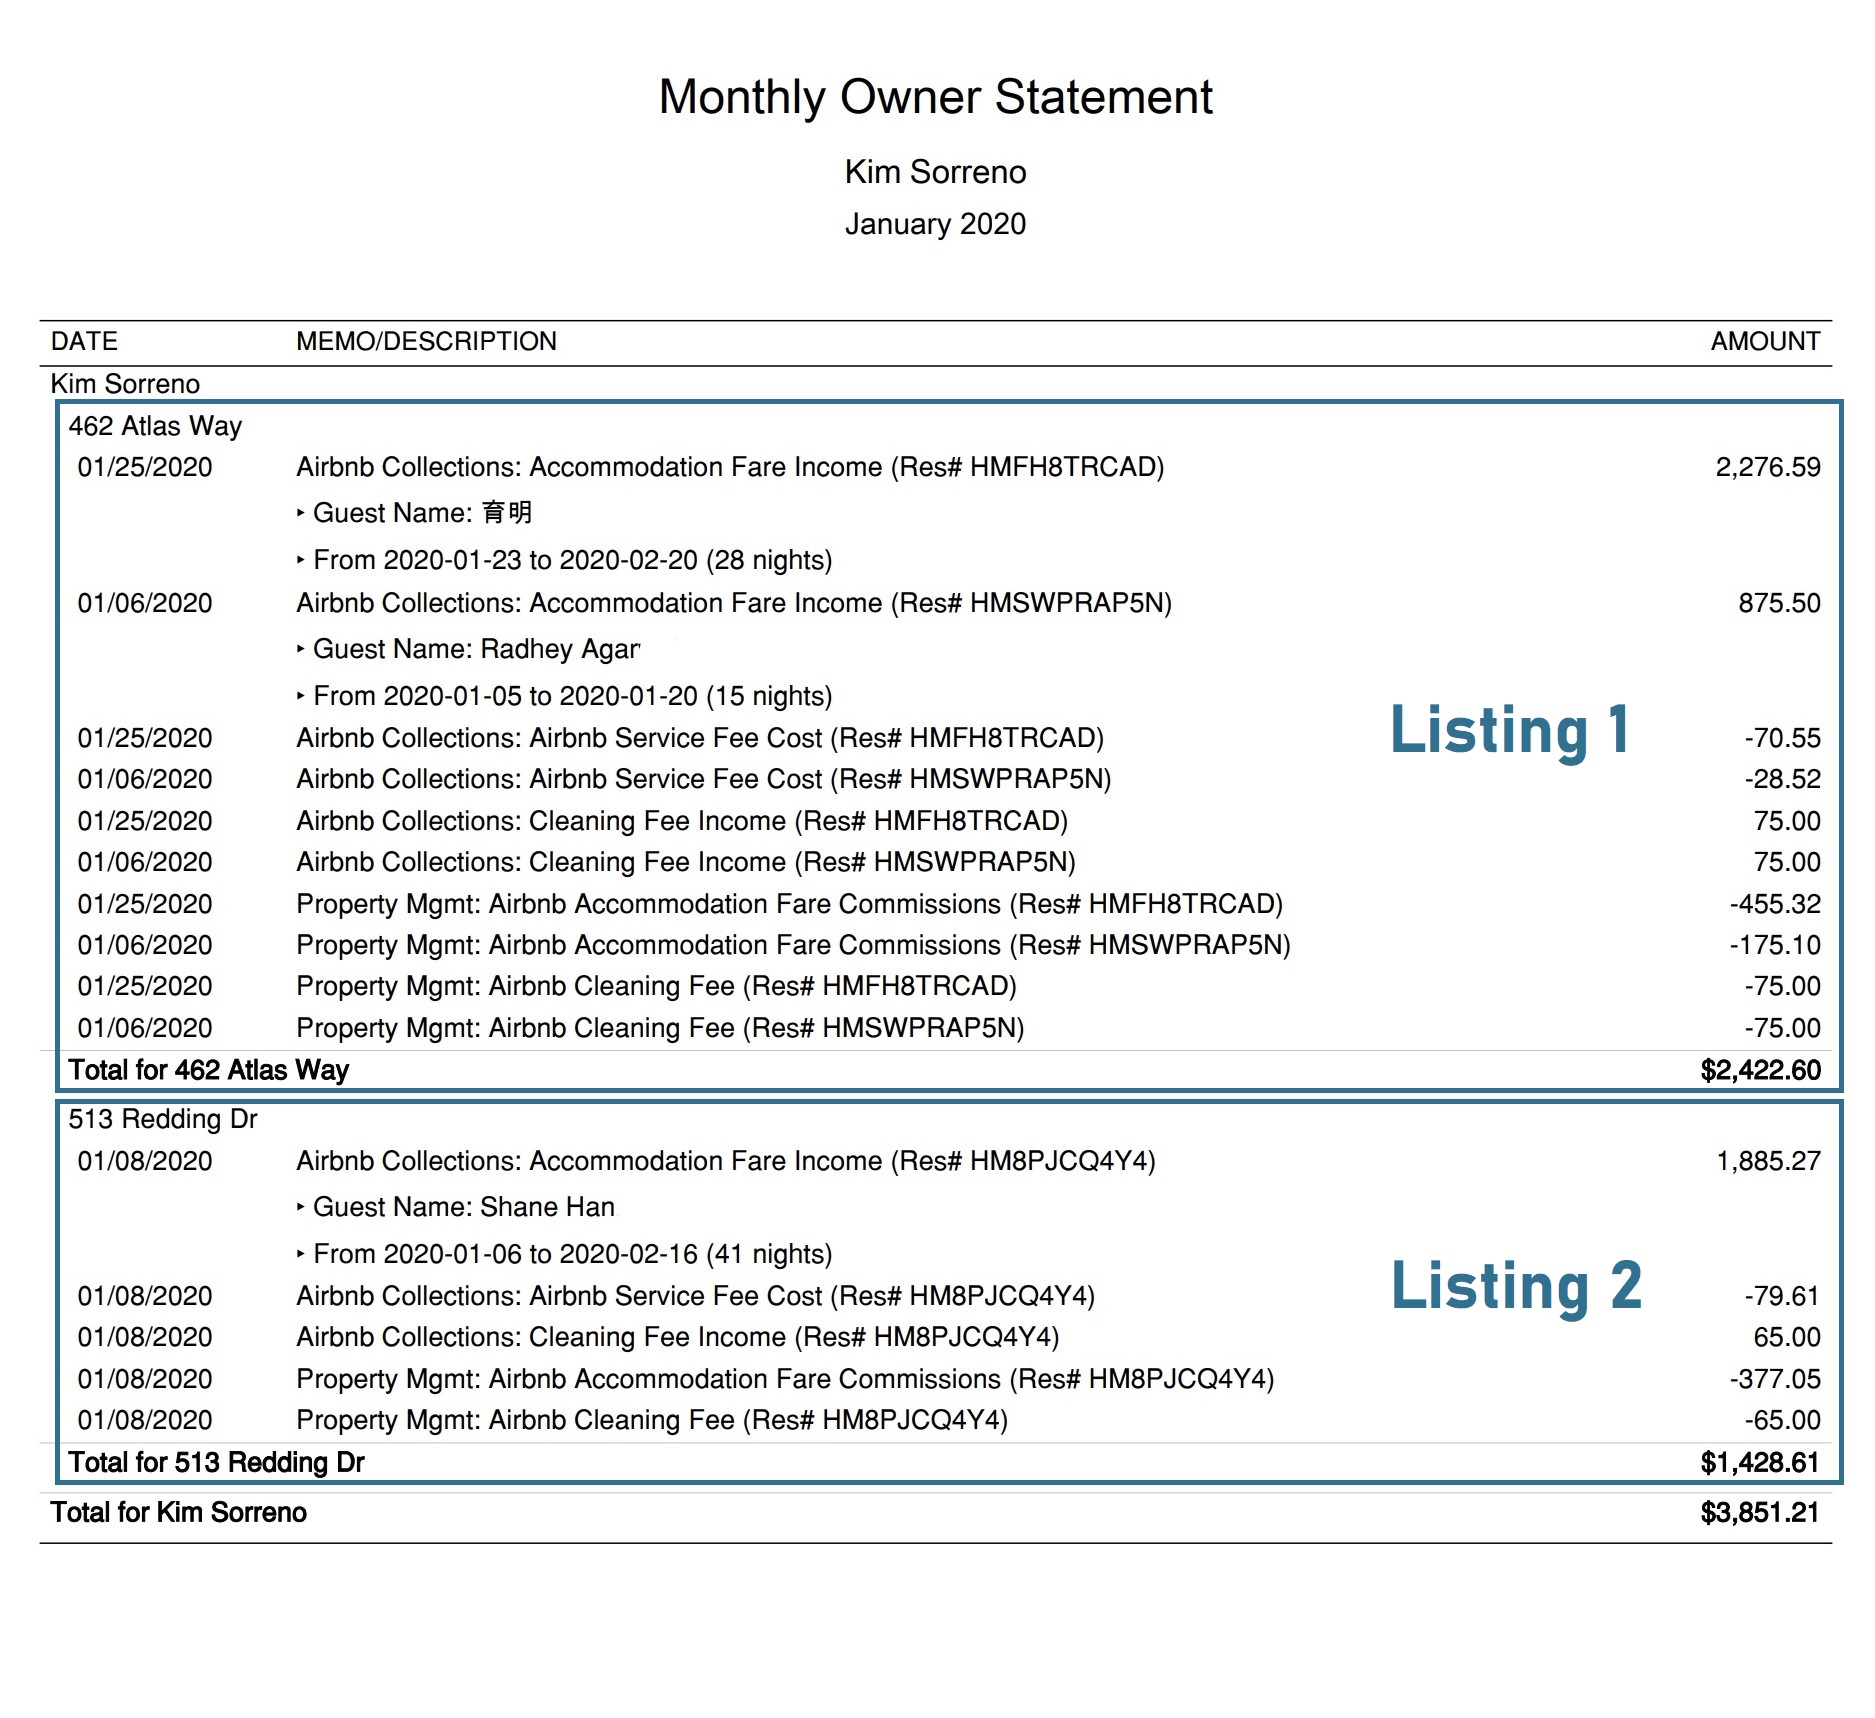 Airbnb Property Management QuickBooks Monthly Owner Statement 2